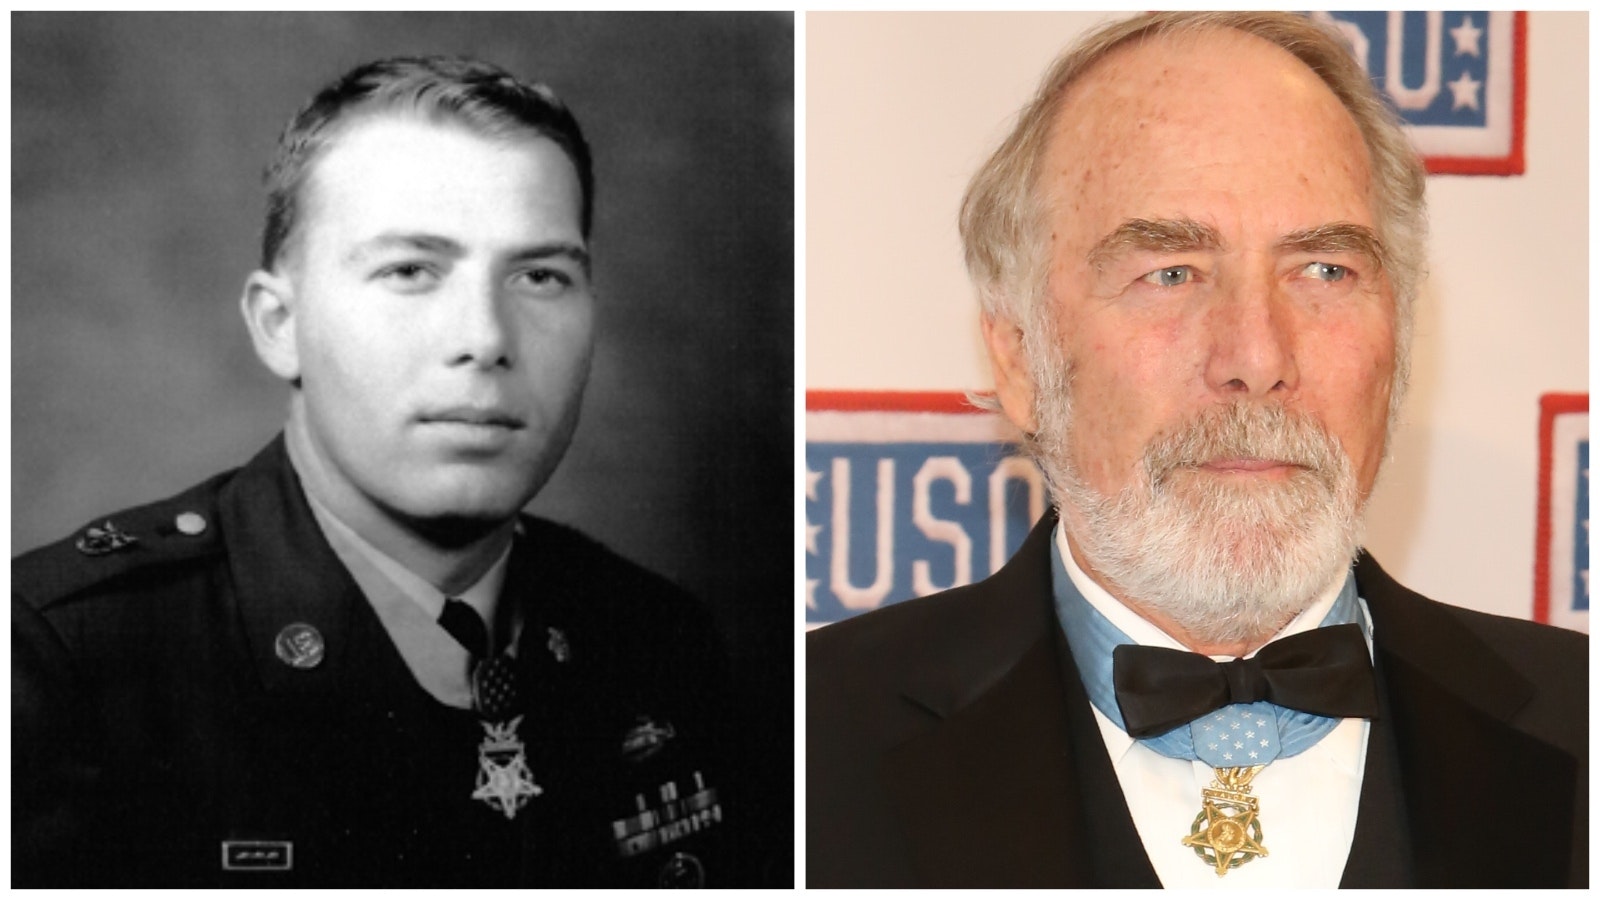 Drew Dix after recieving the Congressional Medal of Honor in 1969, left, and in 2013.